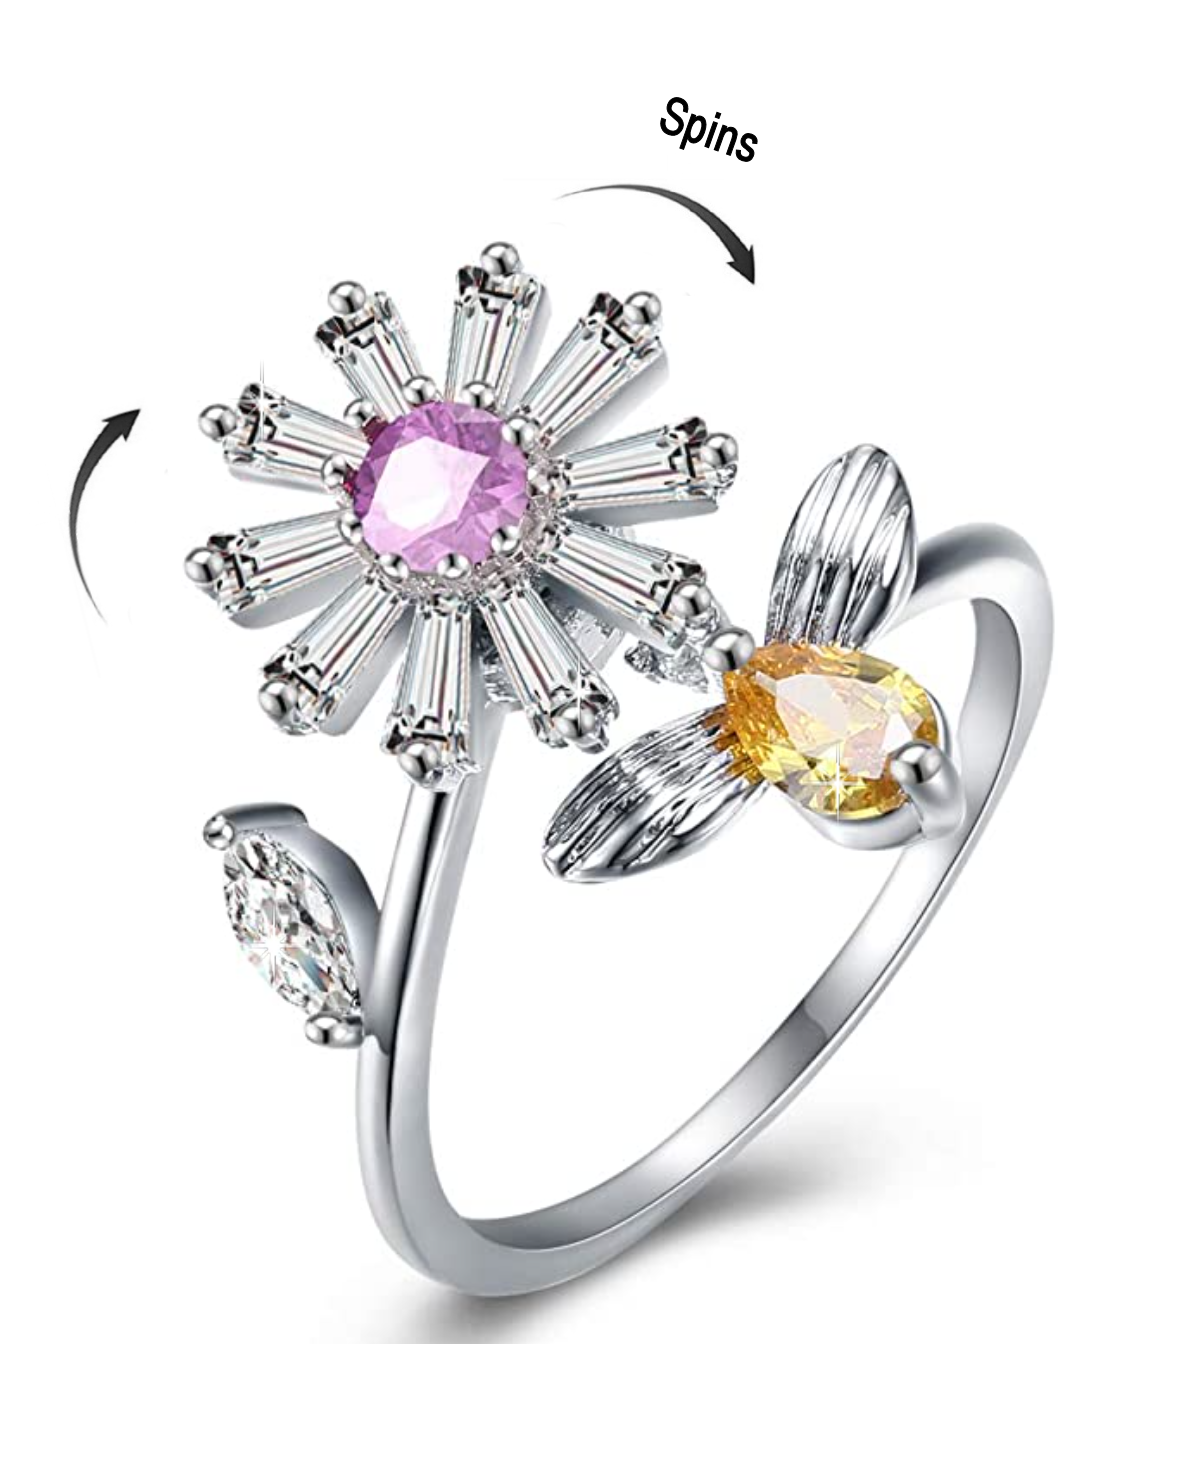 Floral Sterling Silver Spinner Ring | Rebecca Cordingley Jewellery